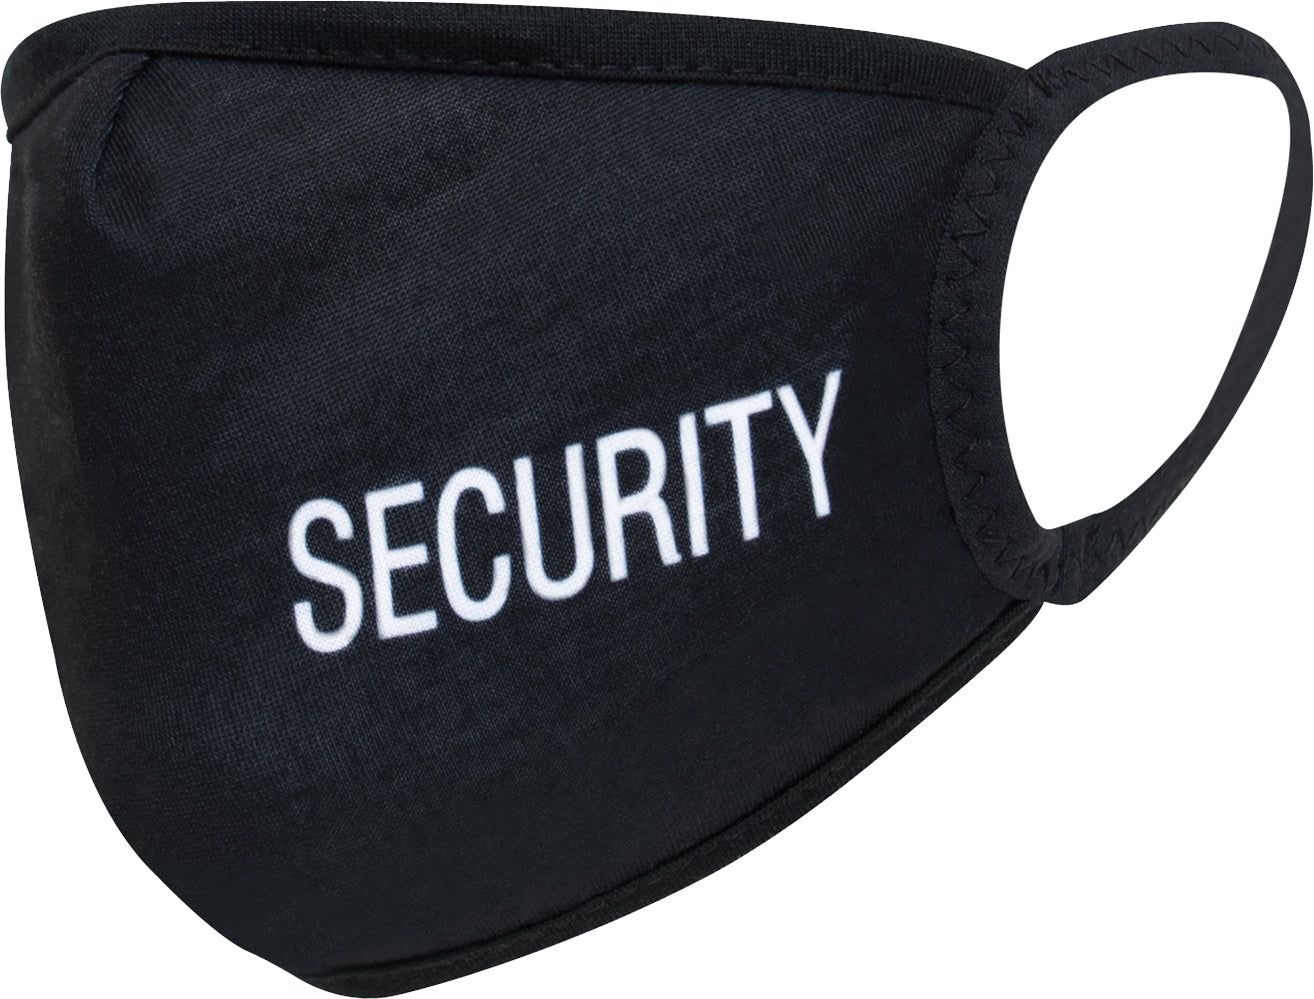 Black Reusable 3 Layer Facemask With Security Print